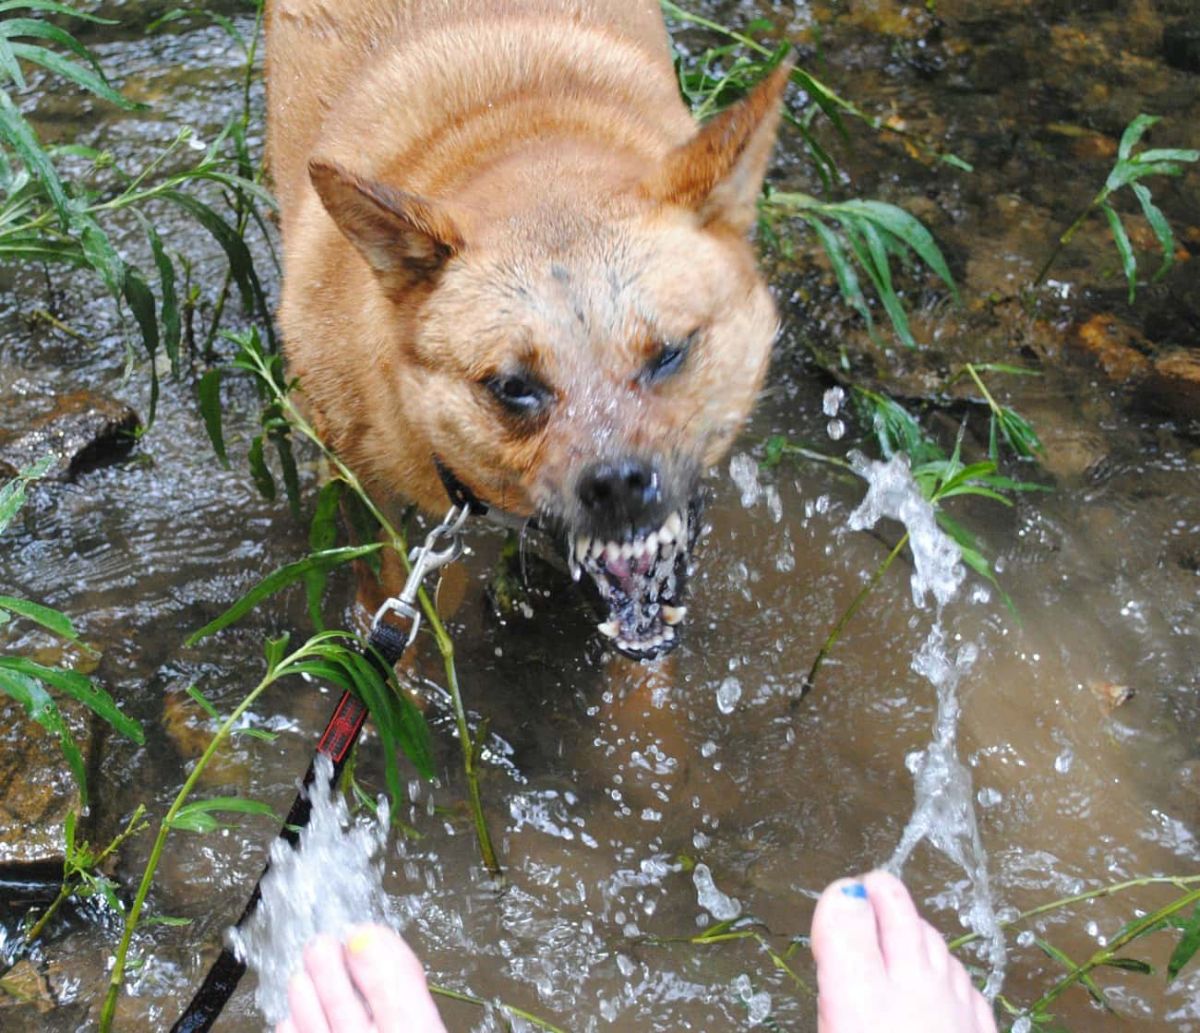 brown dog snarling at someone splashing water at the dog with their feet at a river